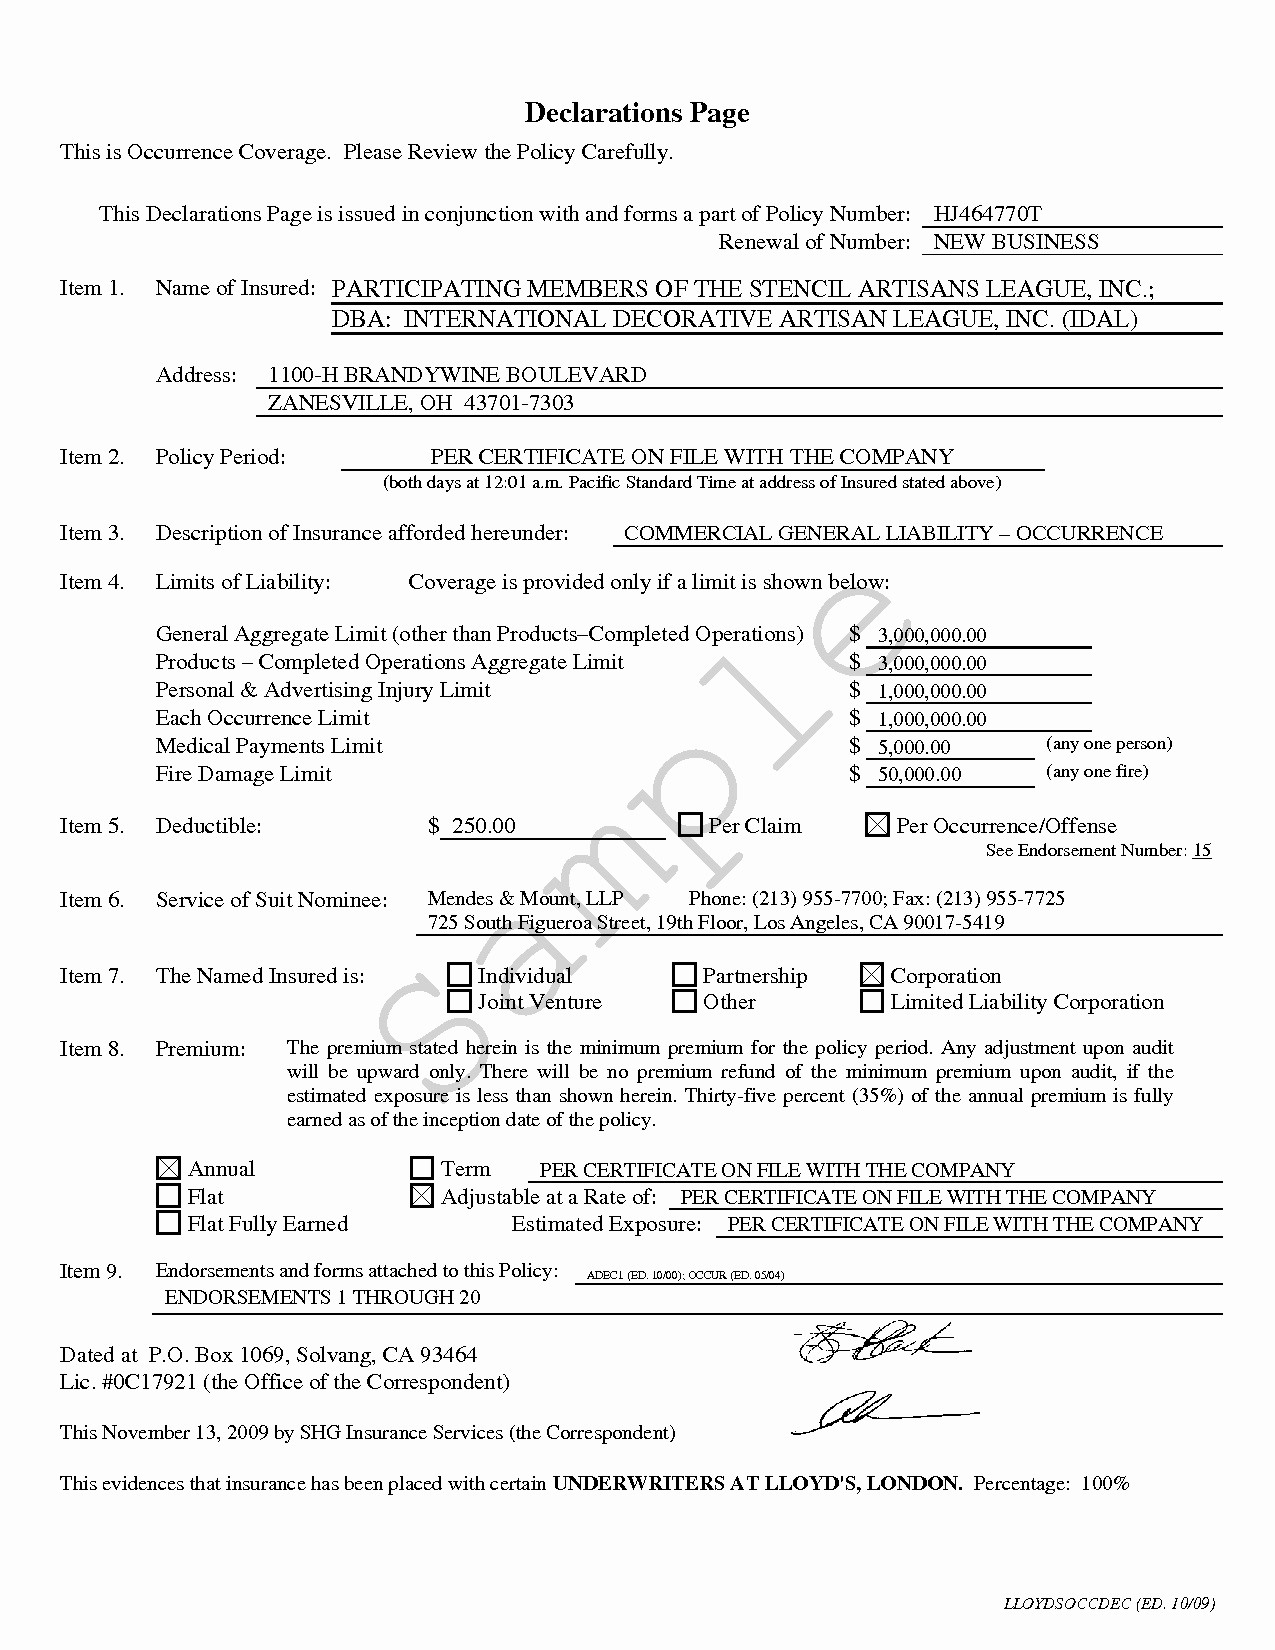 State Farm Declaration Page Sample Lovely Auto Insurance Document